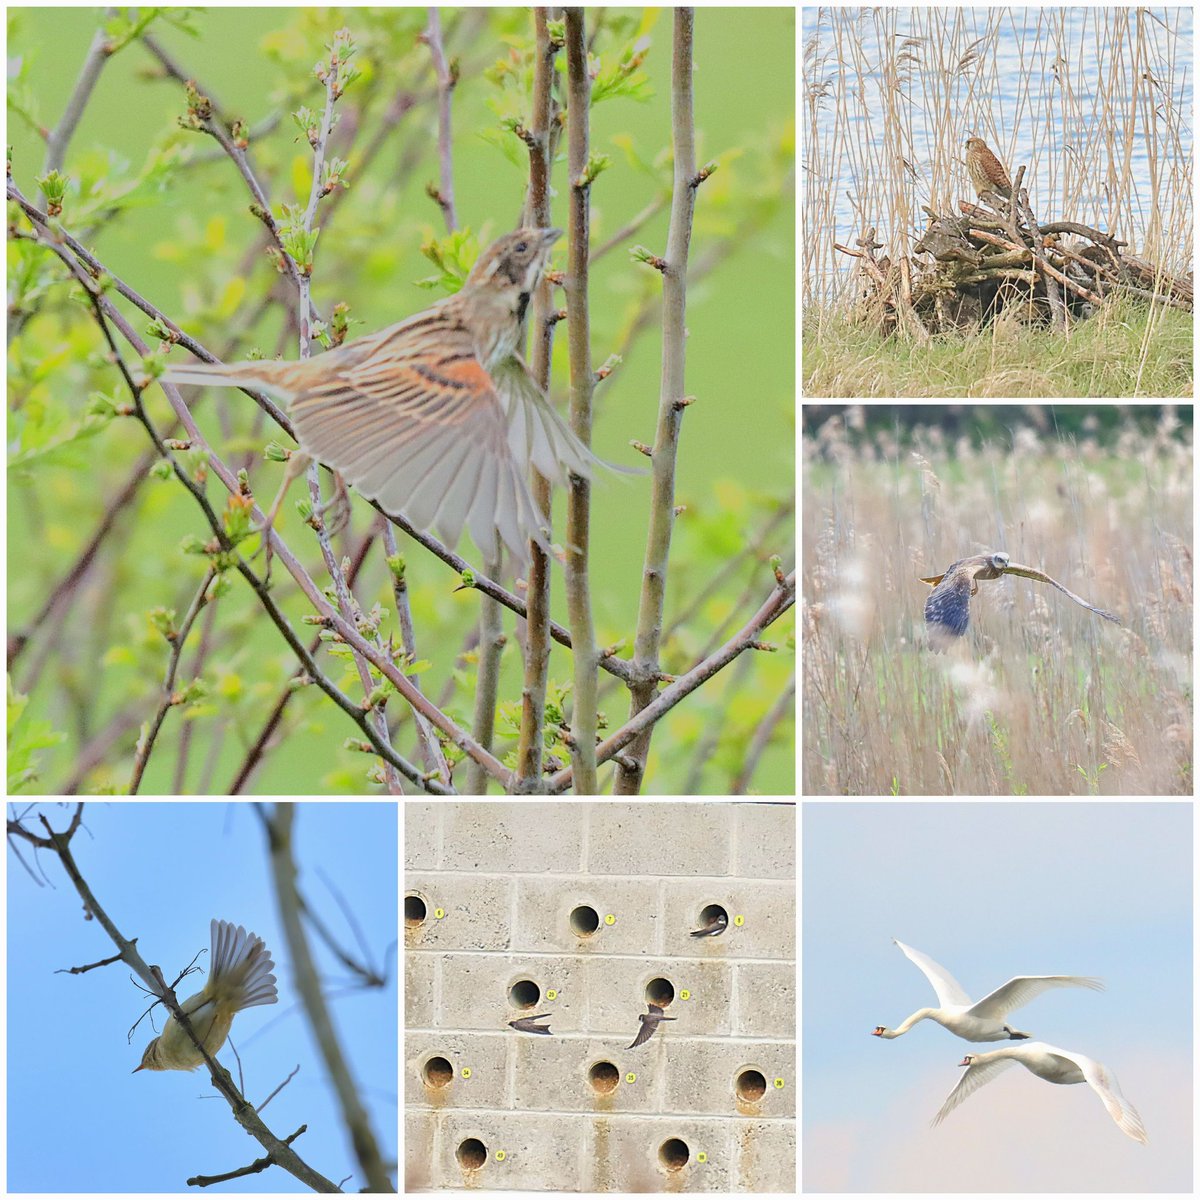 Deeping Lakes - 19 Sand Martin nesting on site - 1 x Swallow(over)
Reed buntings MF - Kestrel - Marsh Harrier - Chiffchaff in song - Cettis Warbler - Willow Warbler -  5 x Great Crested Grebe. @Lincsbirding @SLArchive @BTO_Lincs @LincsWildlife